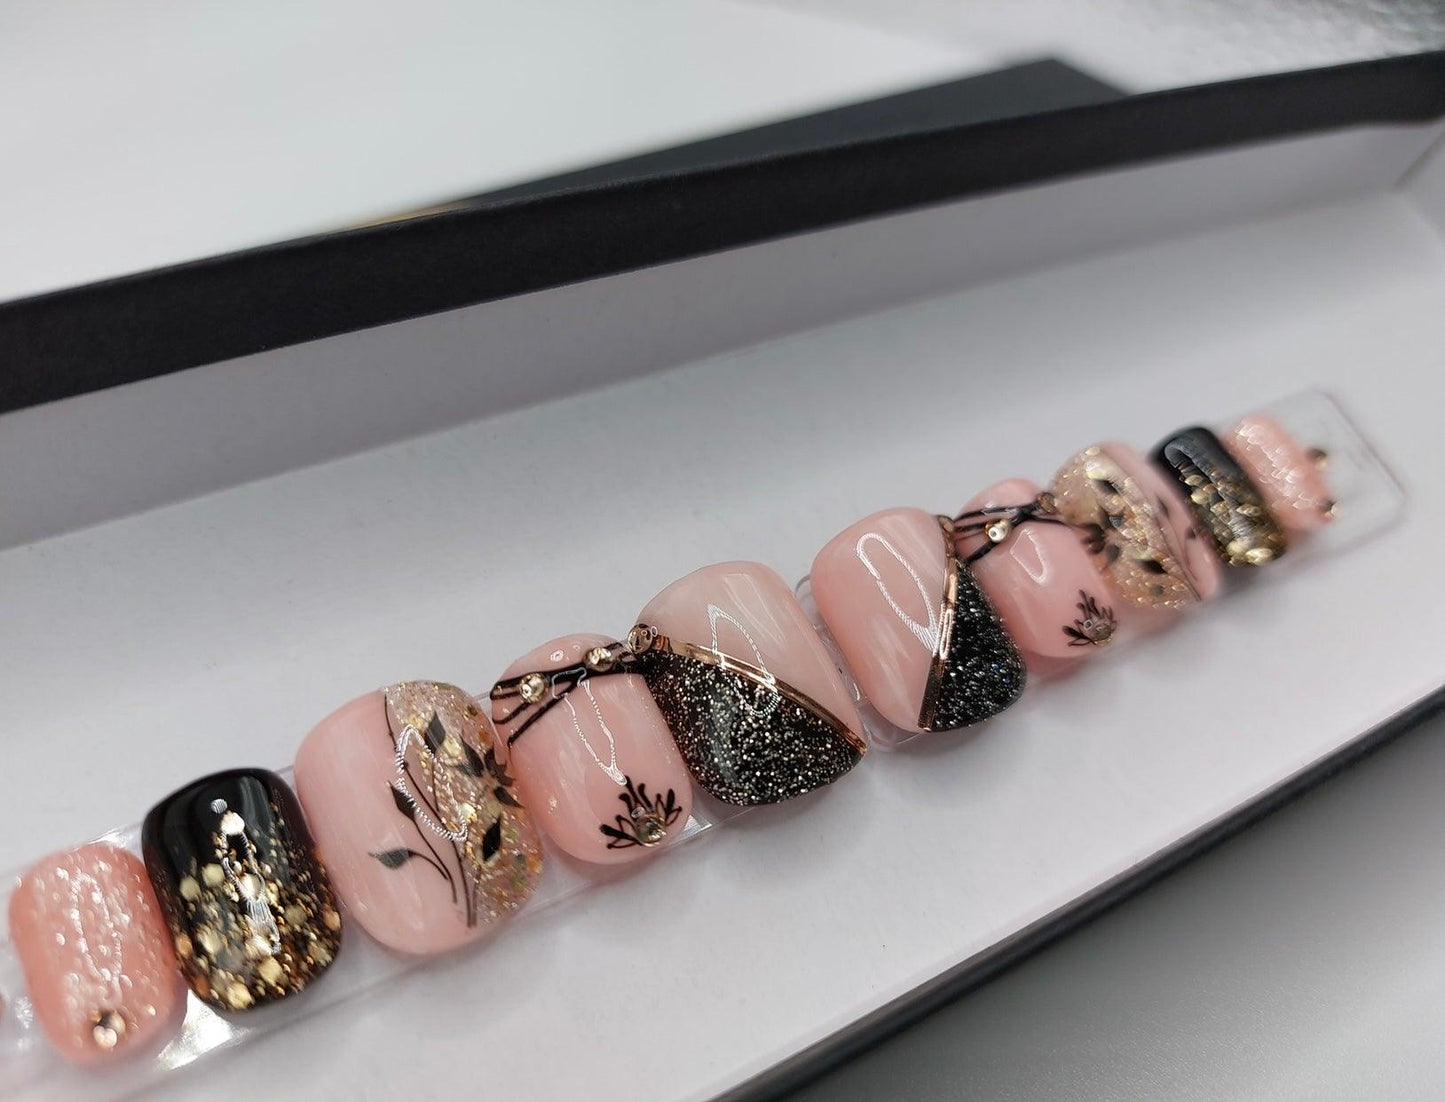 Custom nail design in a soft rose quartz base color with black and gold glitter accents, floral designs, champagne gems and a short squoval shape.